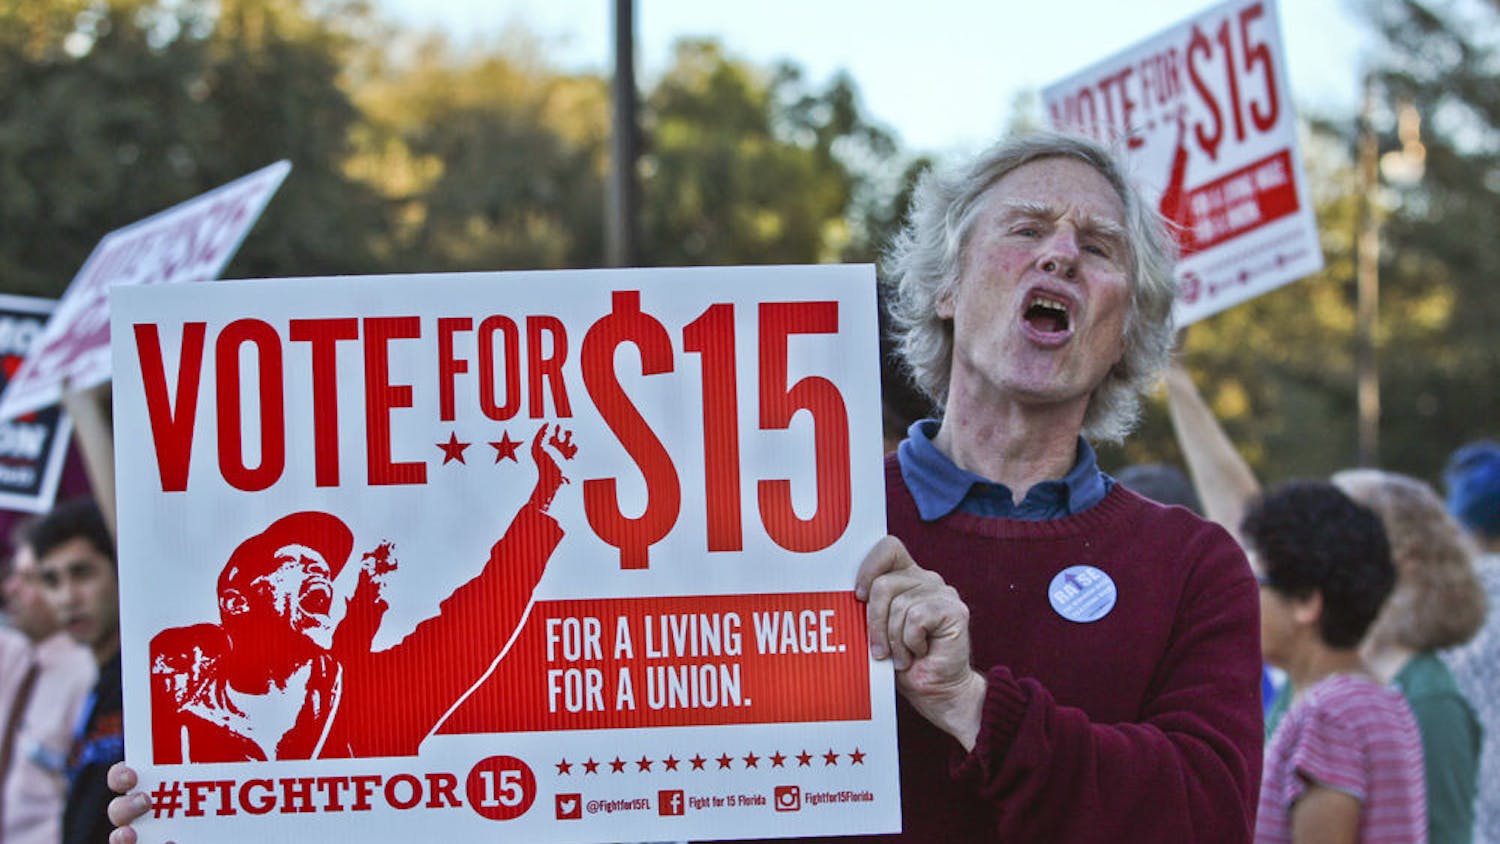 Frank Blankenship, the 63-year-old founder of MindFreedom Florida, protests for a $15 minimum wage at the corner of West University Avenue and 13th Street on Nov. 10, 2015. There were 60 people protesting, including local politicians, student group representatives, local faith leaders and Santa Fe College faculty.